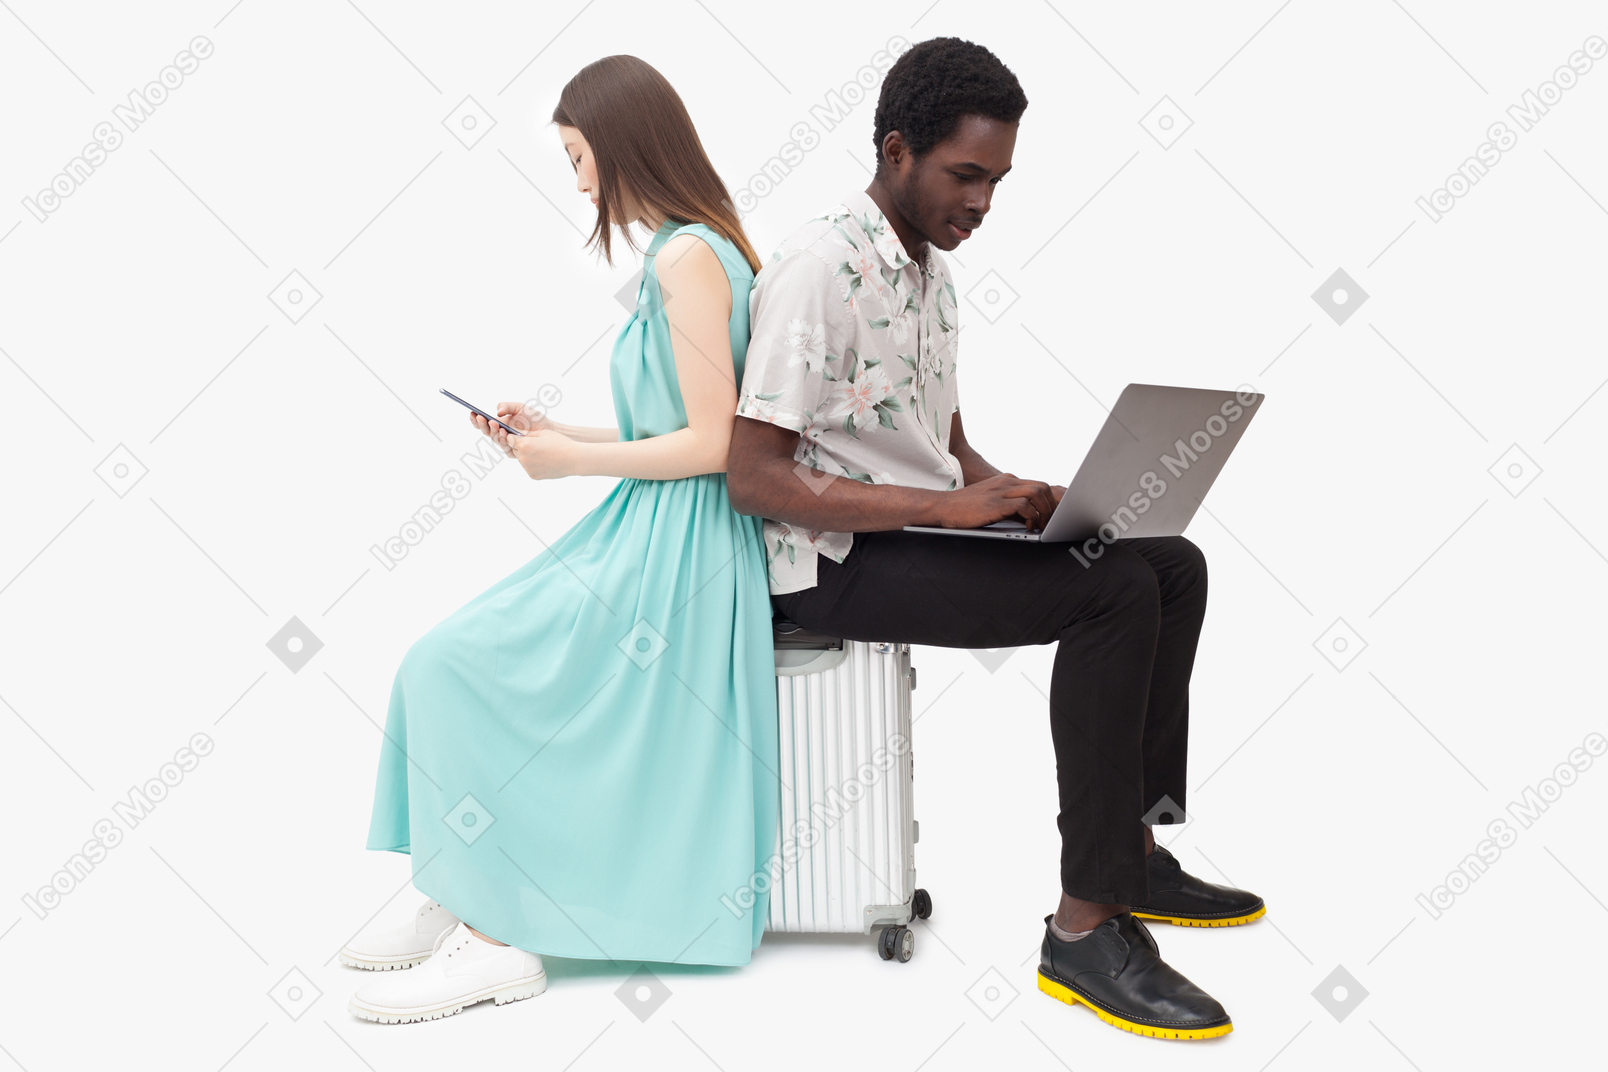 Interracial couple sitting on suitcase and and using gadjets